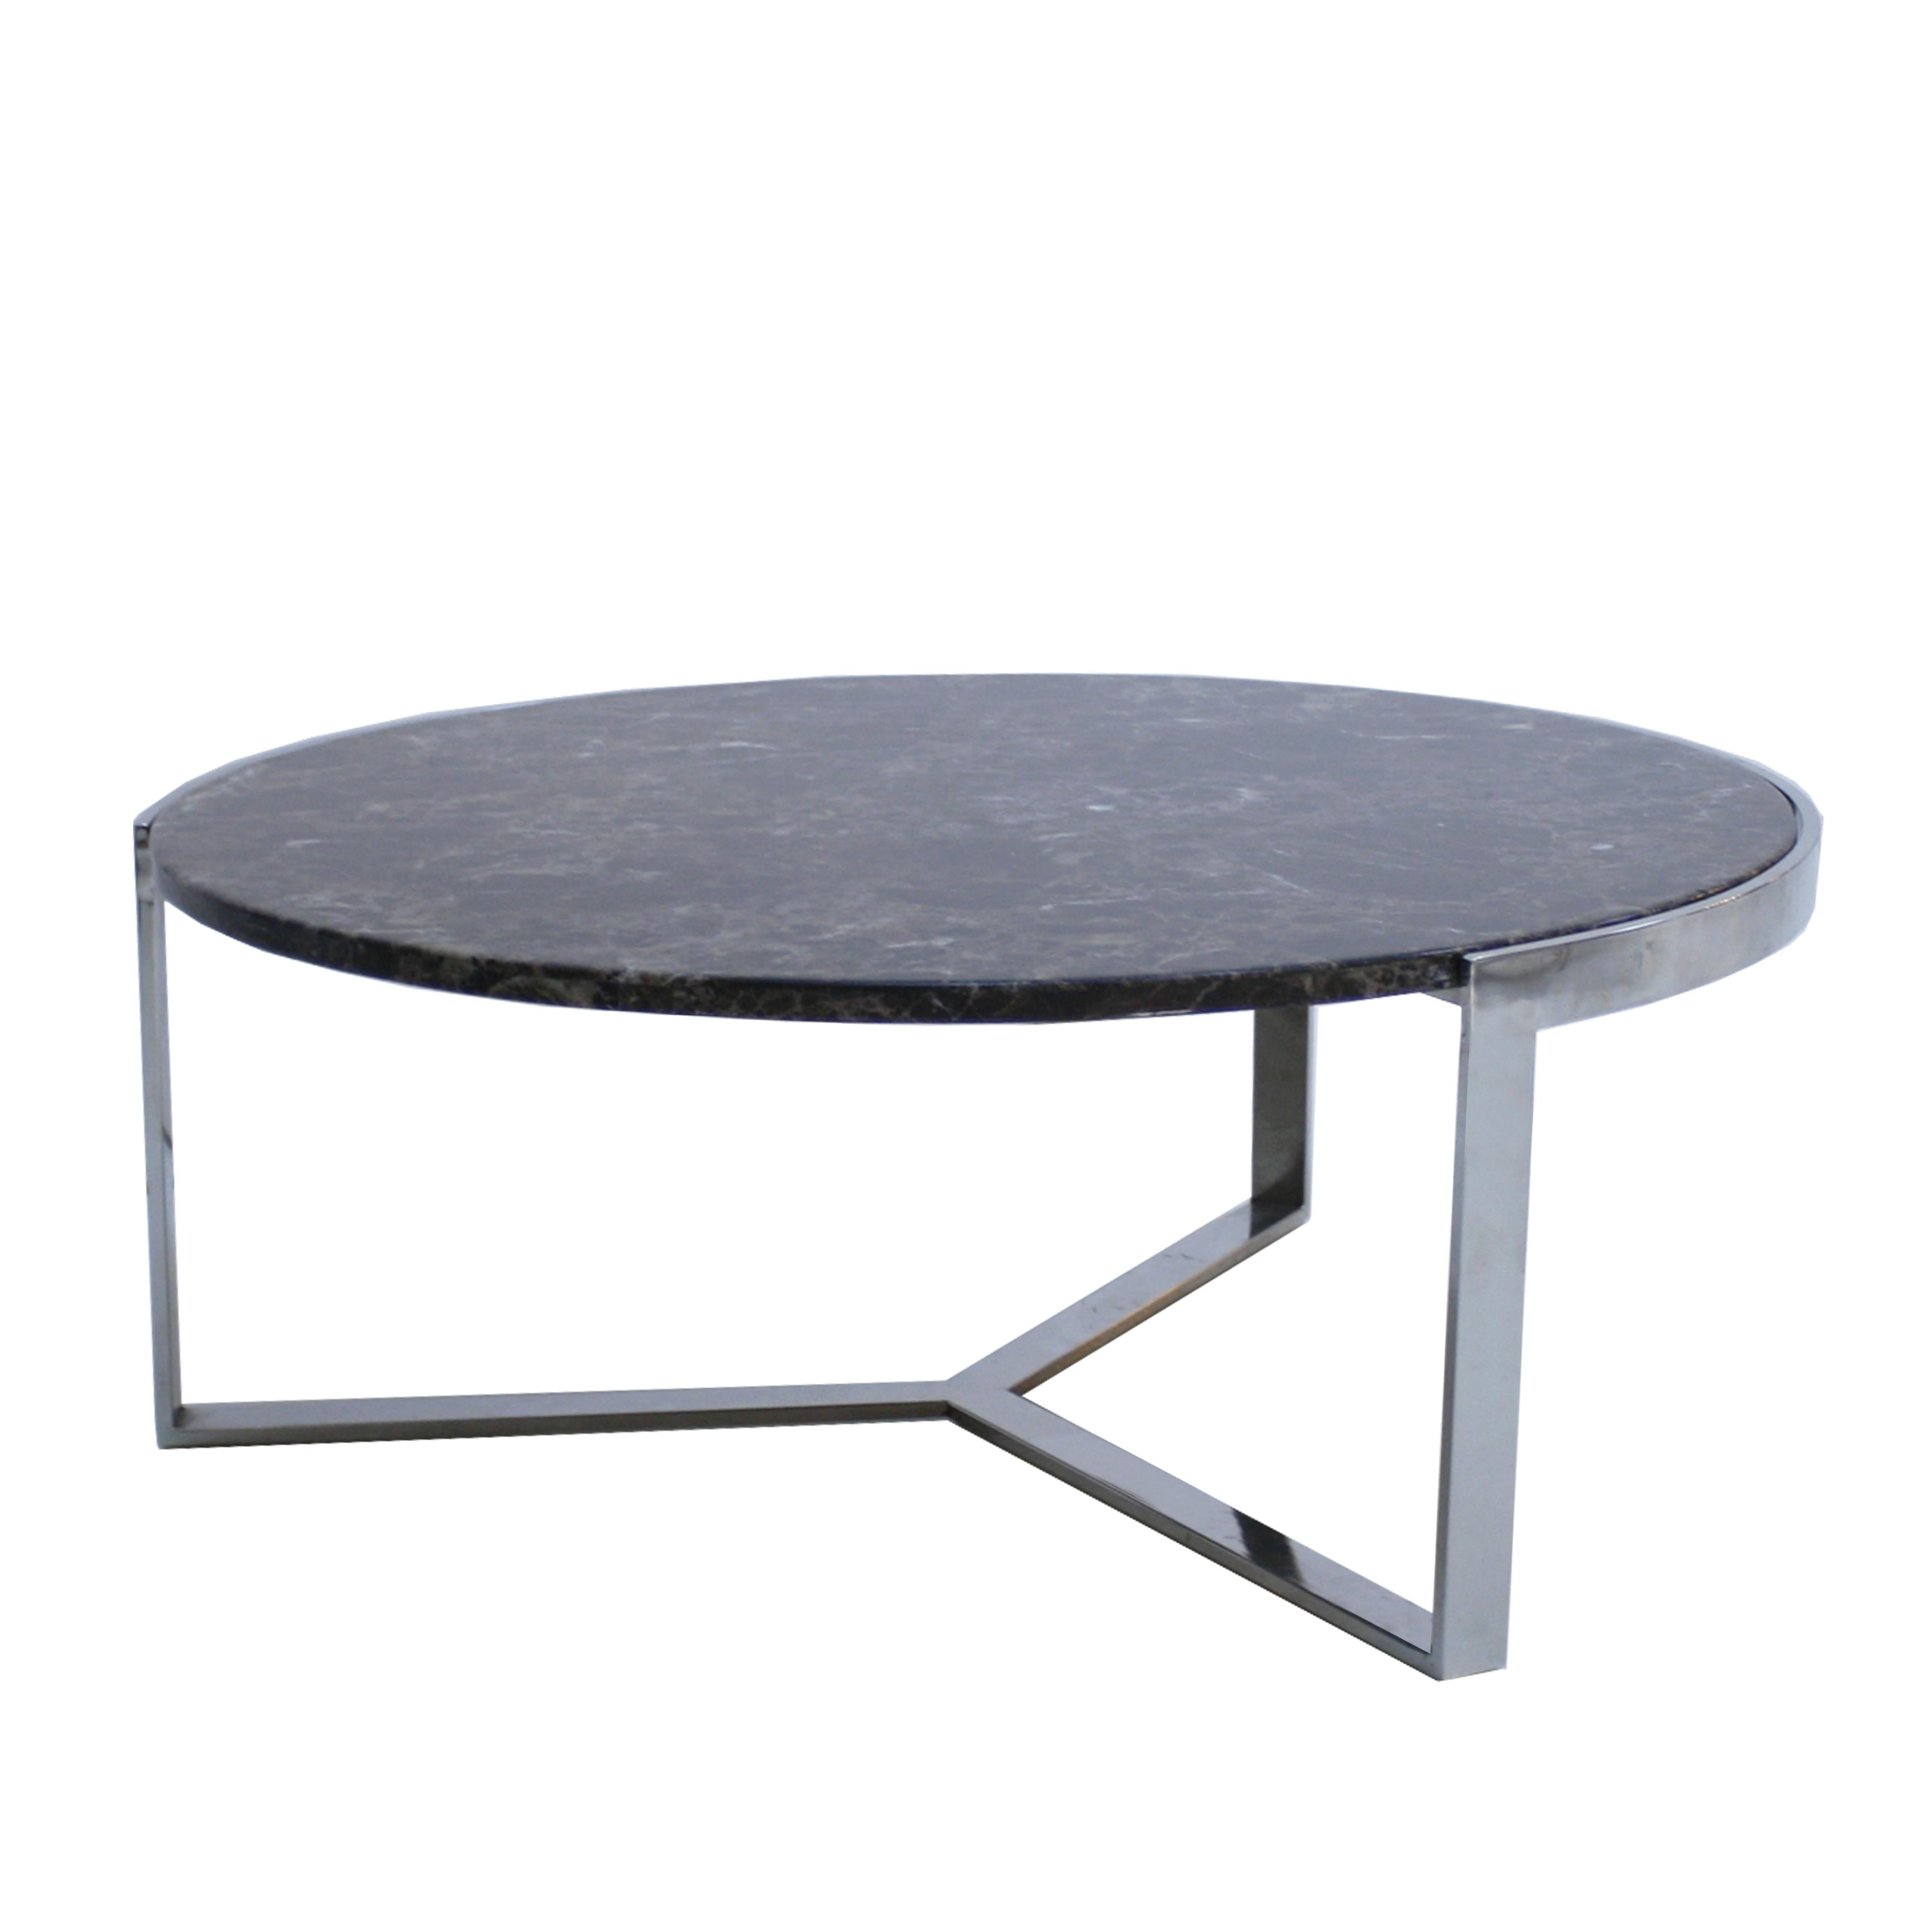 Circular marble coffee table made of emperador dark marble top and steel plate base structure, France, 1970s.

